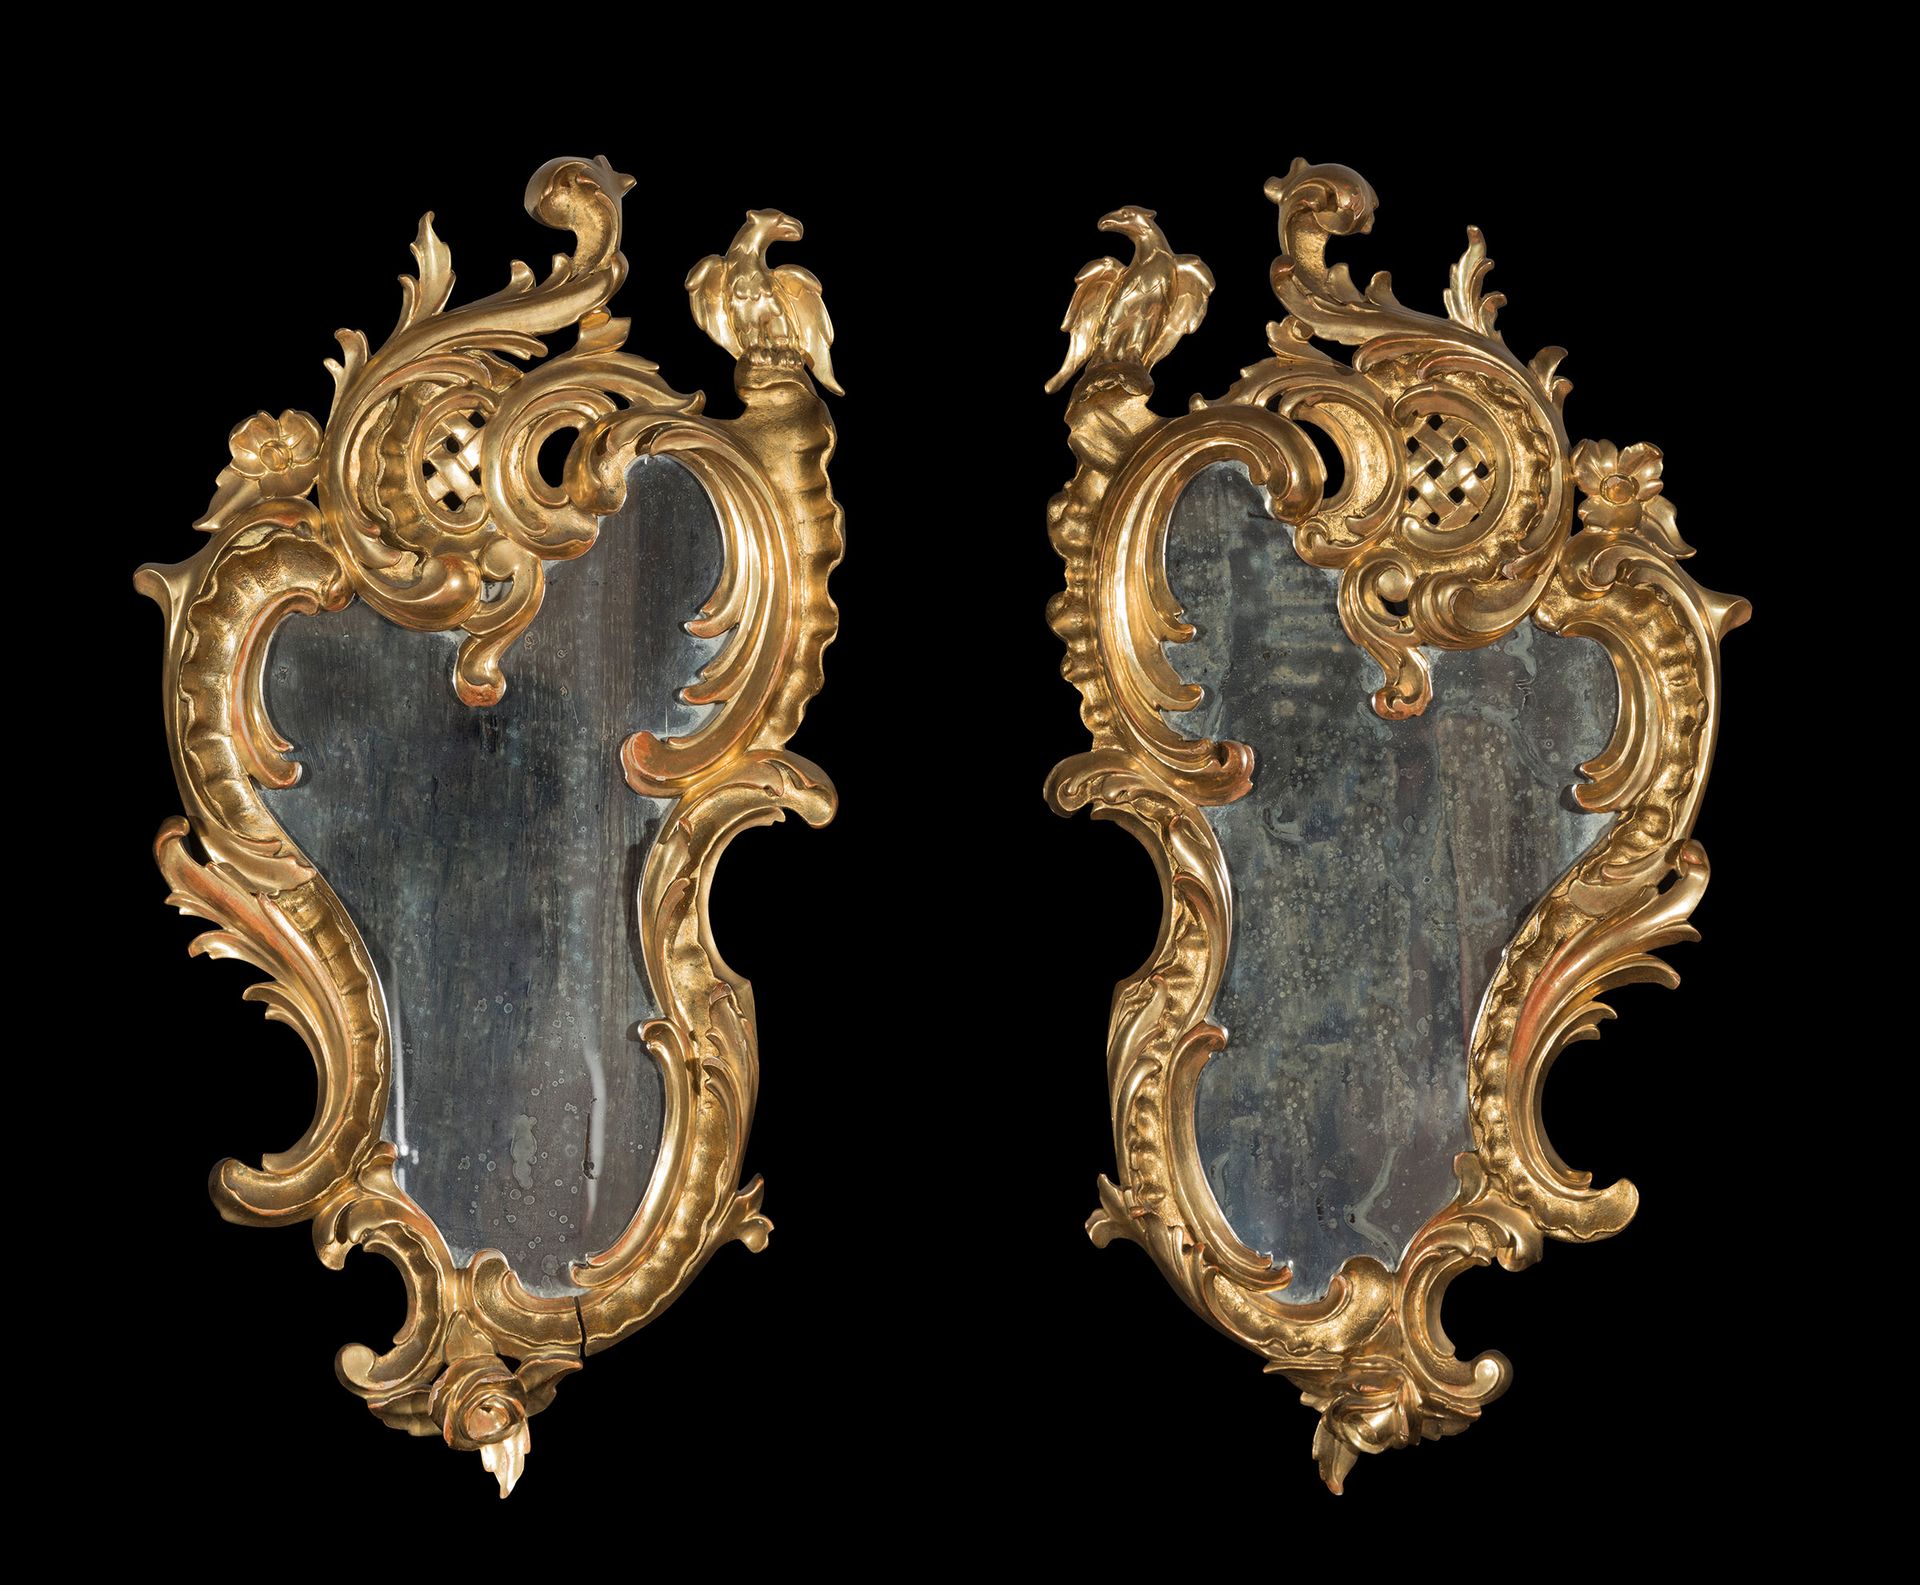 Null Pair of Rococo cornucopias; Spain, early 20th century.
Carved and gilded wo&hellip;